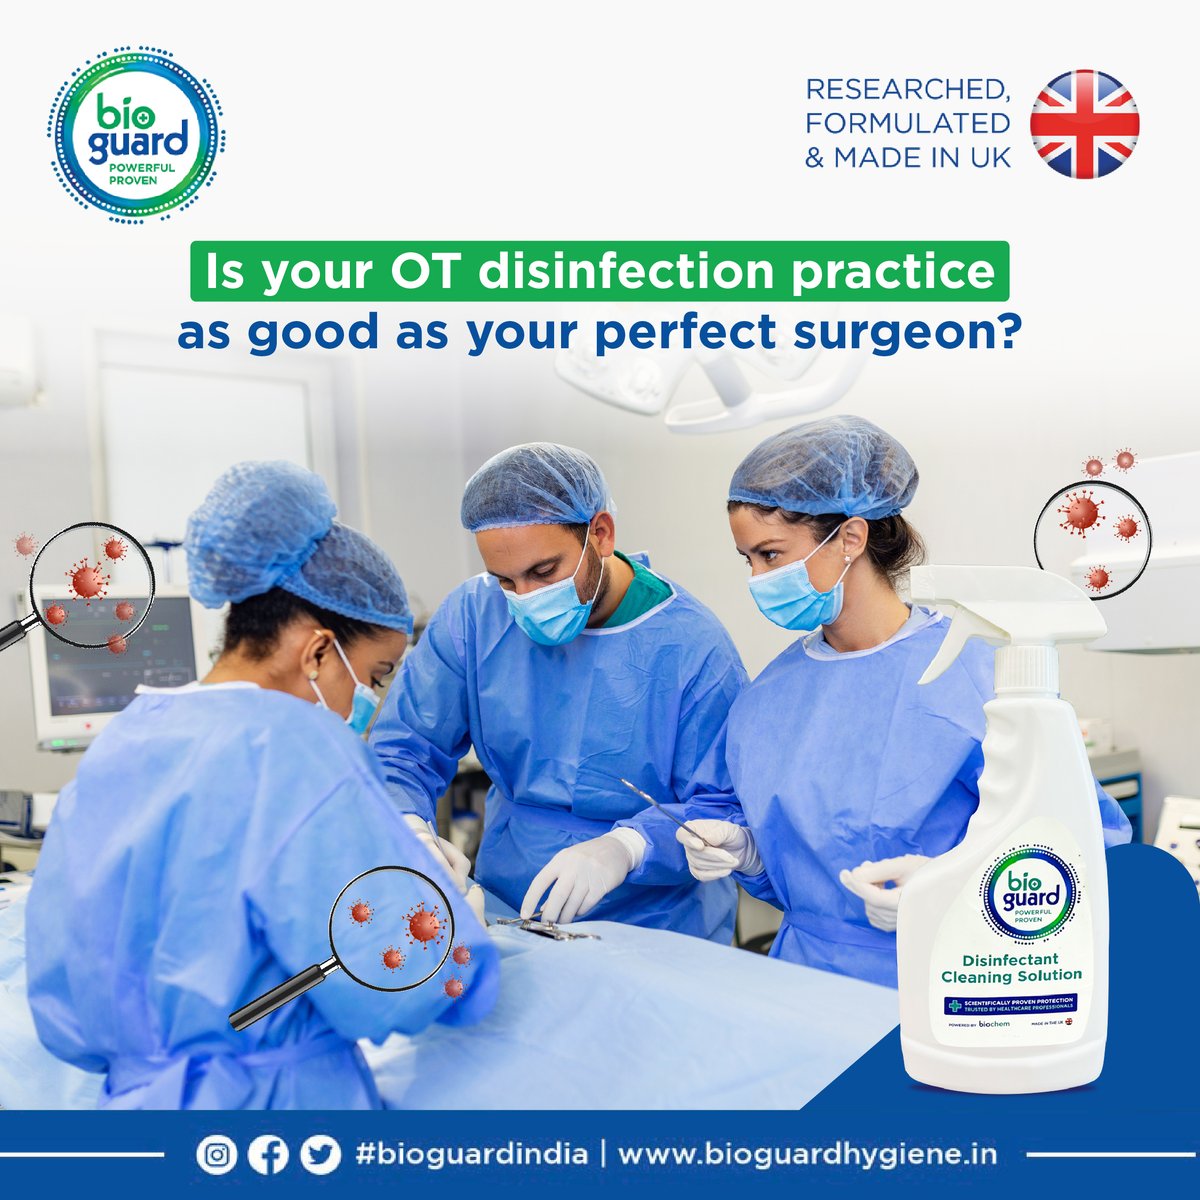 Ever pondered if surgeons are as clean as they seem? Even spotless surfaces can harbor unseen dangers. With Bioguard, every surface gets a deep clean, ensuring your safety comes first. #SafeSurgeons #DisinfectWithBioguard #MicrobeFree #HospitalSafety #PathogenProtection #Bioguard